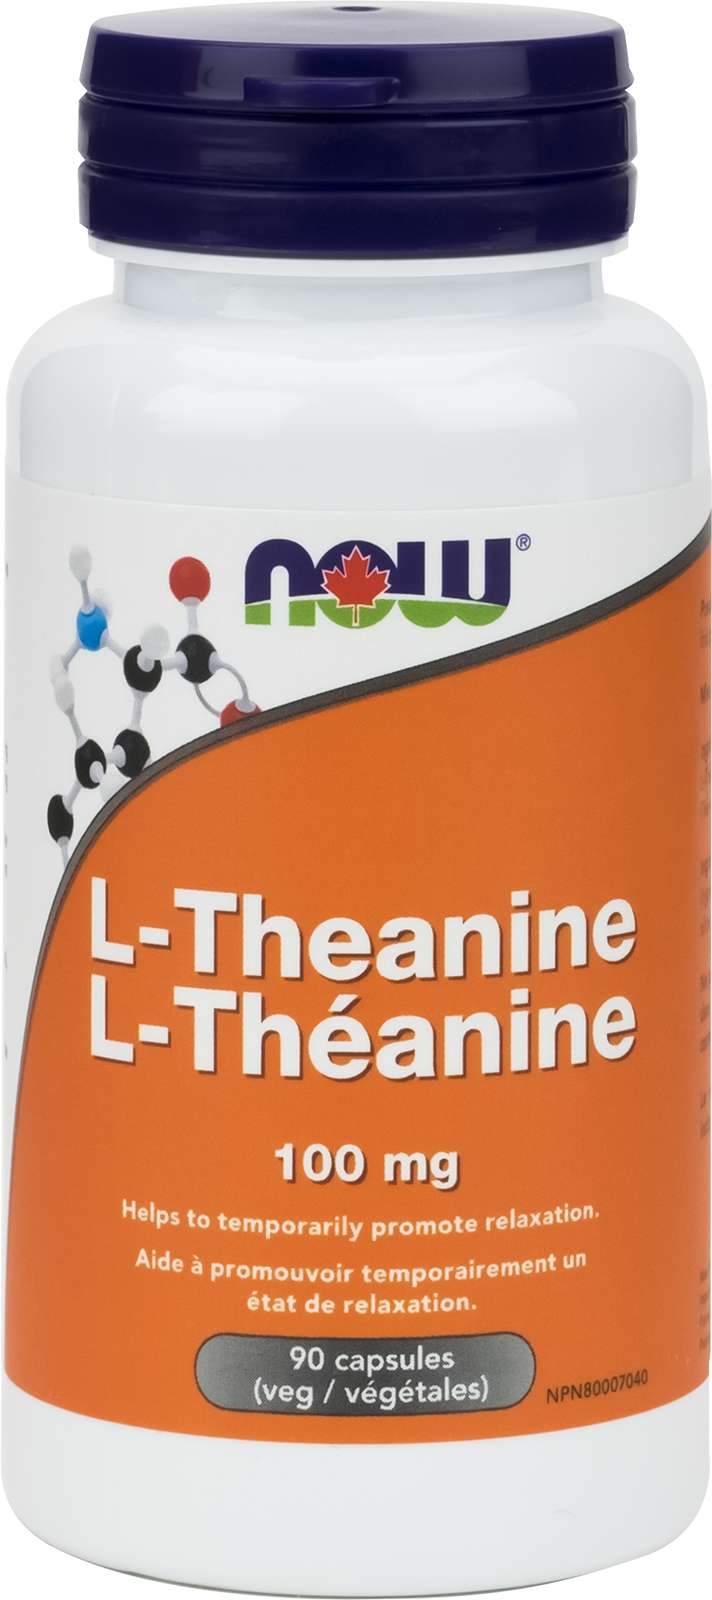 NOW L-Theanine 100 mg 90 VCaps Image 1